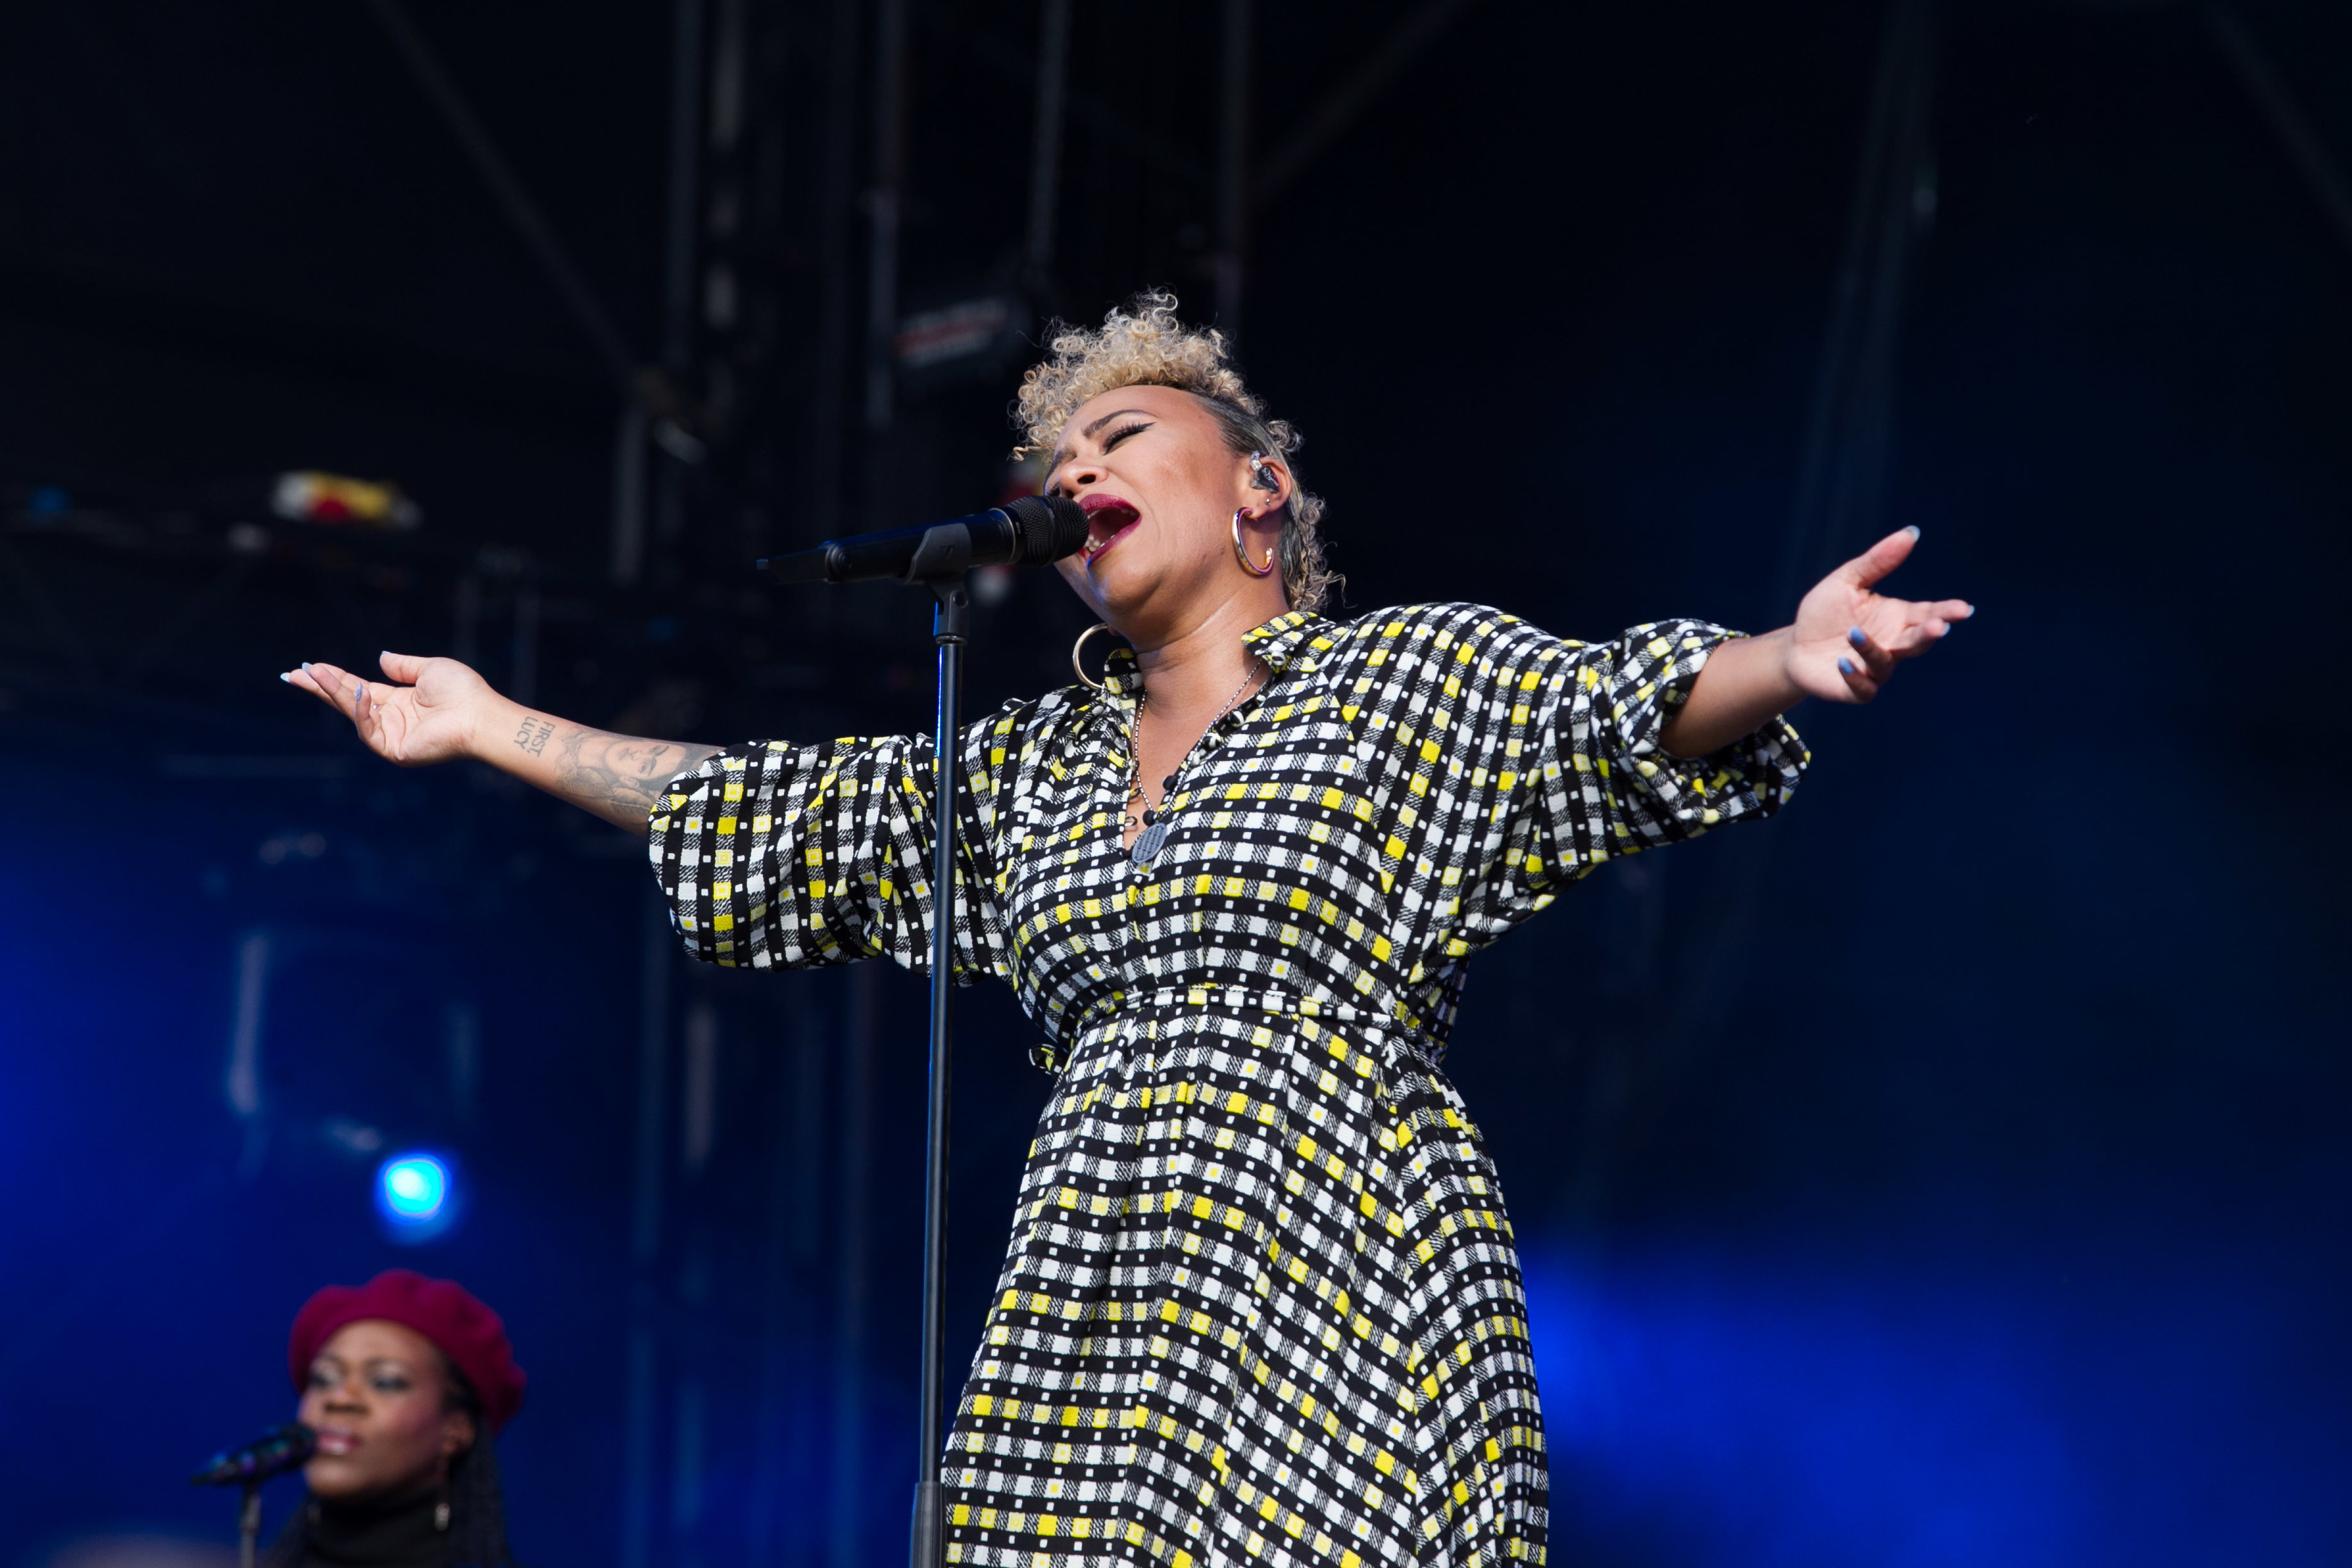 Emeli Sande performed at Scone Palace part of BBC's Biggest Weekend.